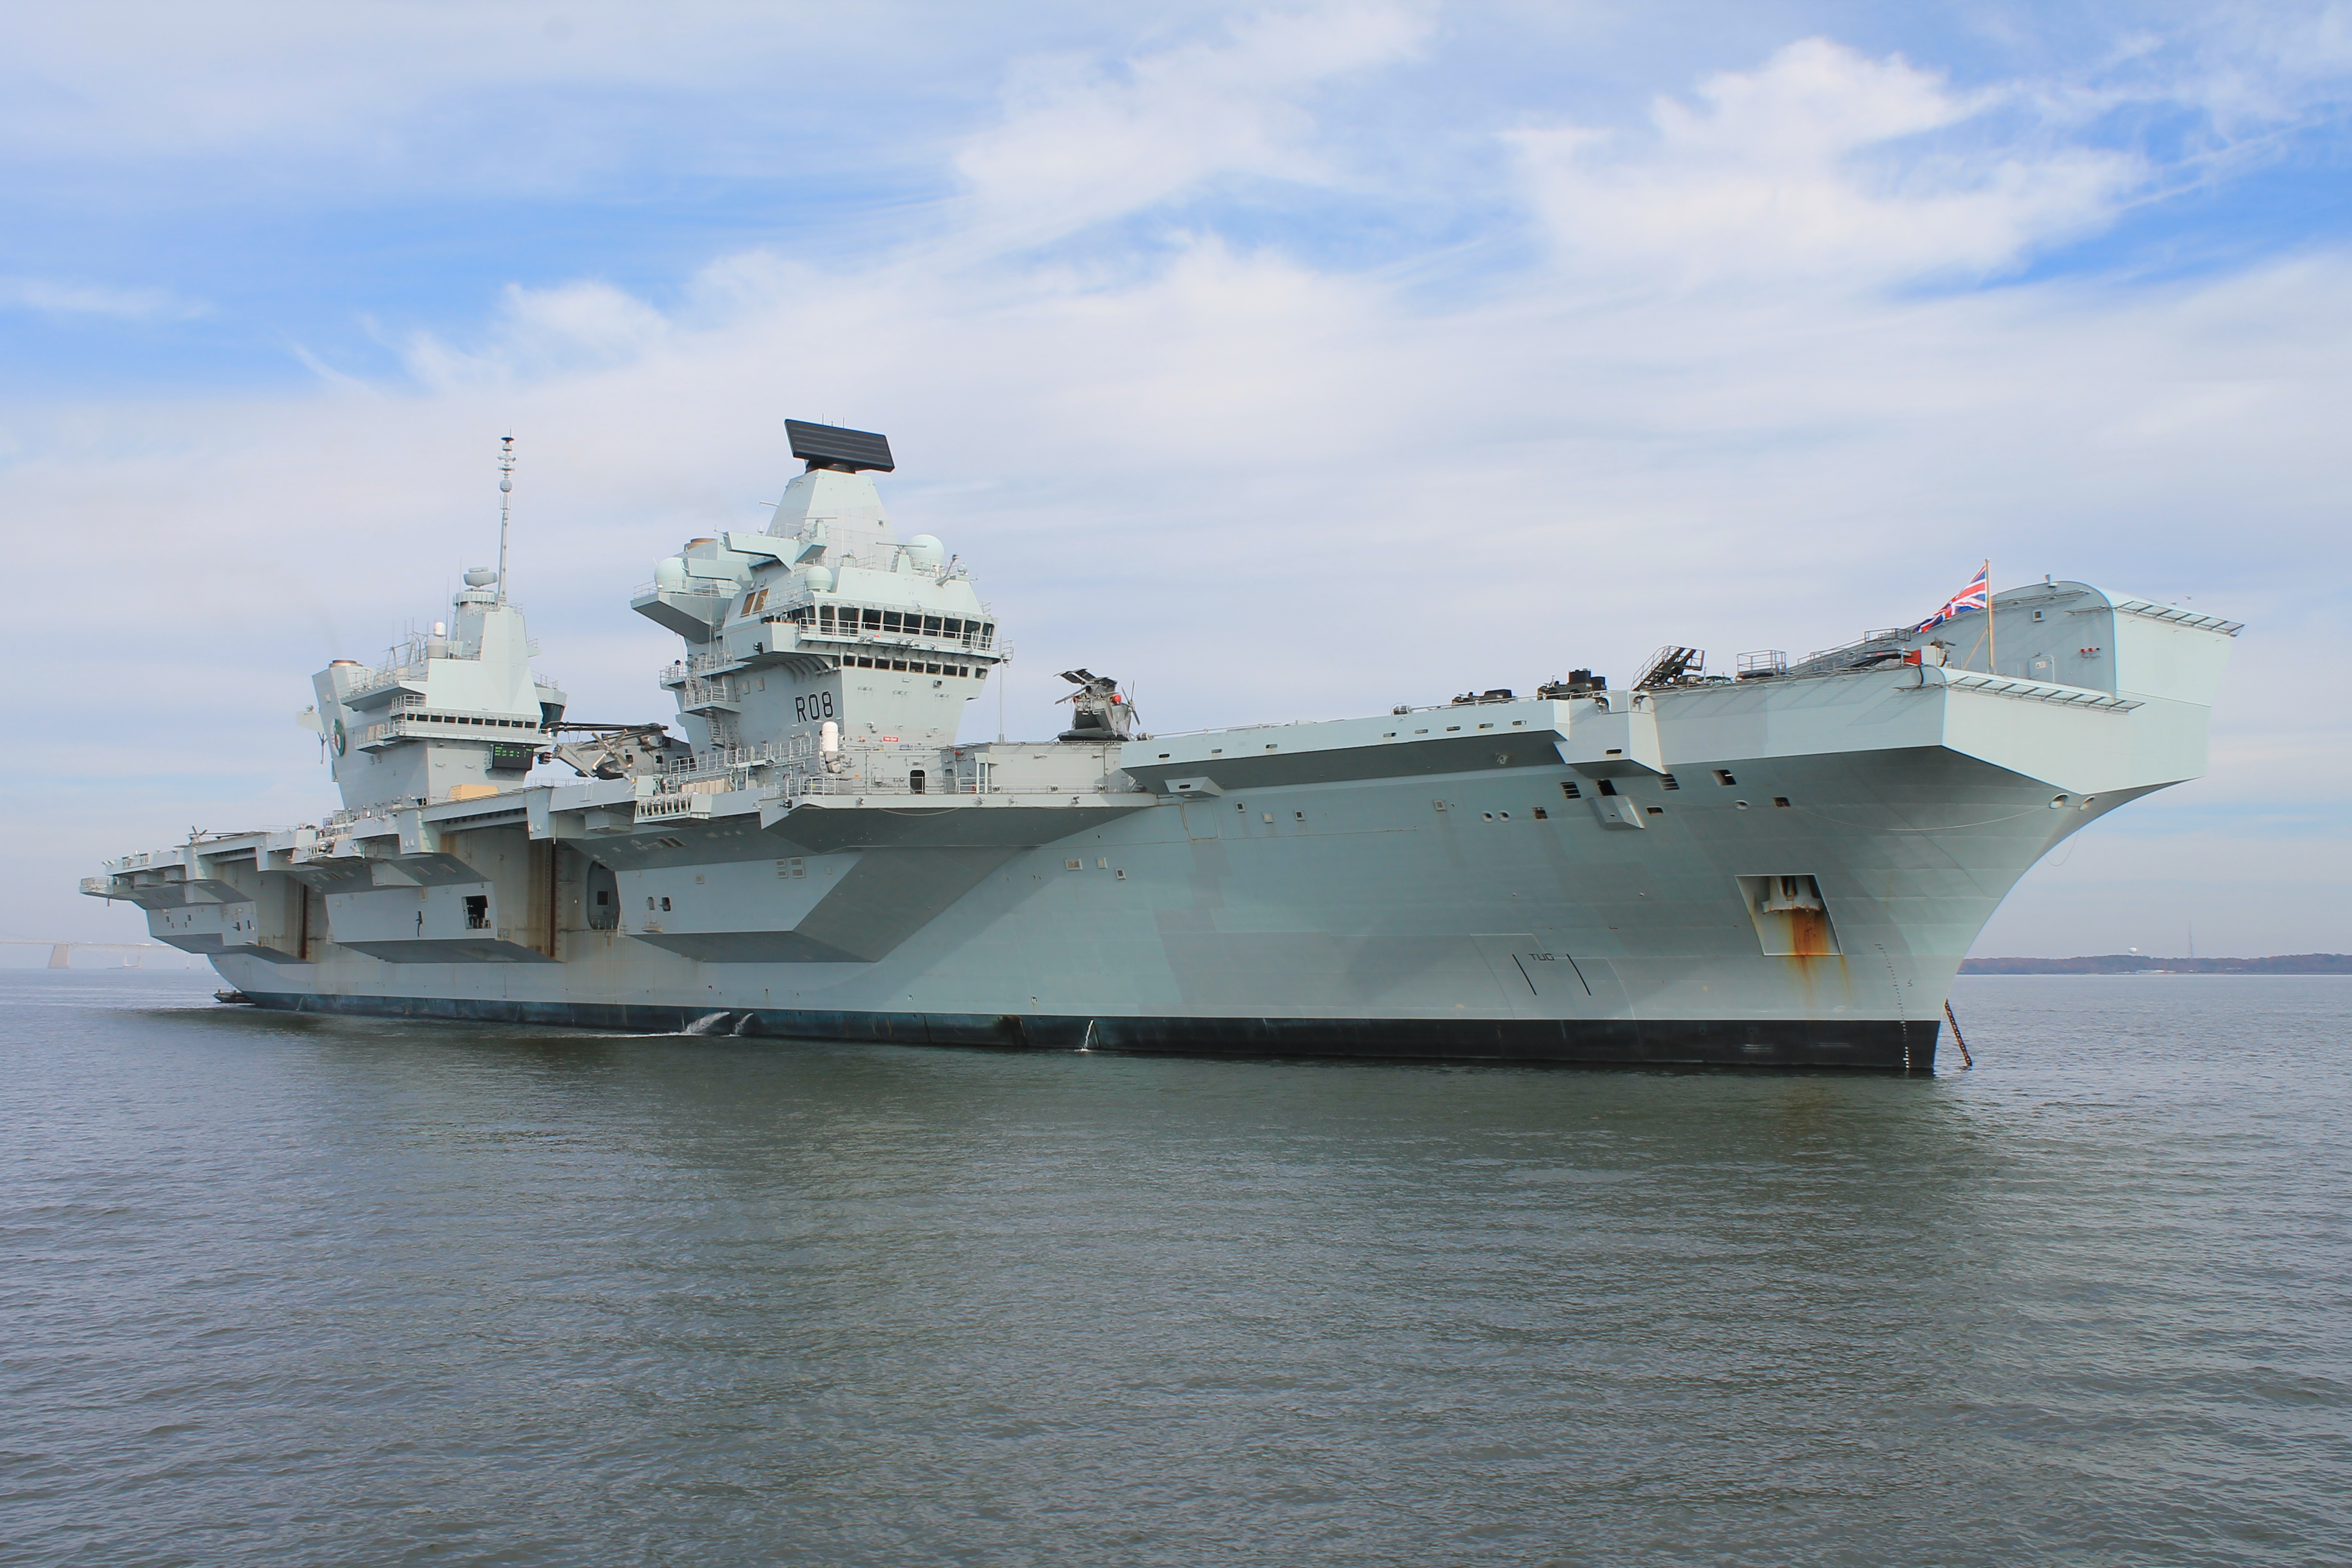 Royal Navy Intends Hms Queen Elizabeth To Be Integrated Into U S Carrier Operations Usni News